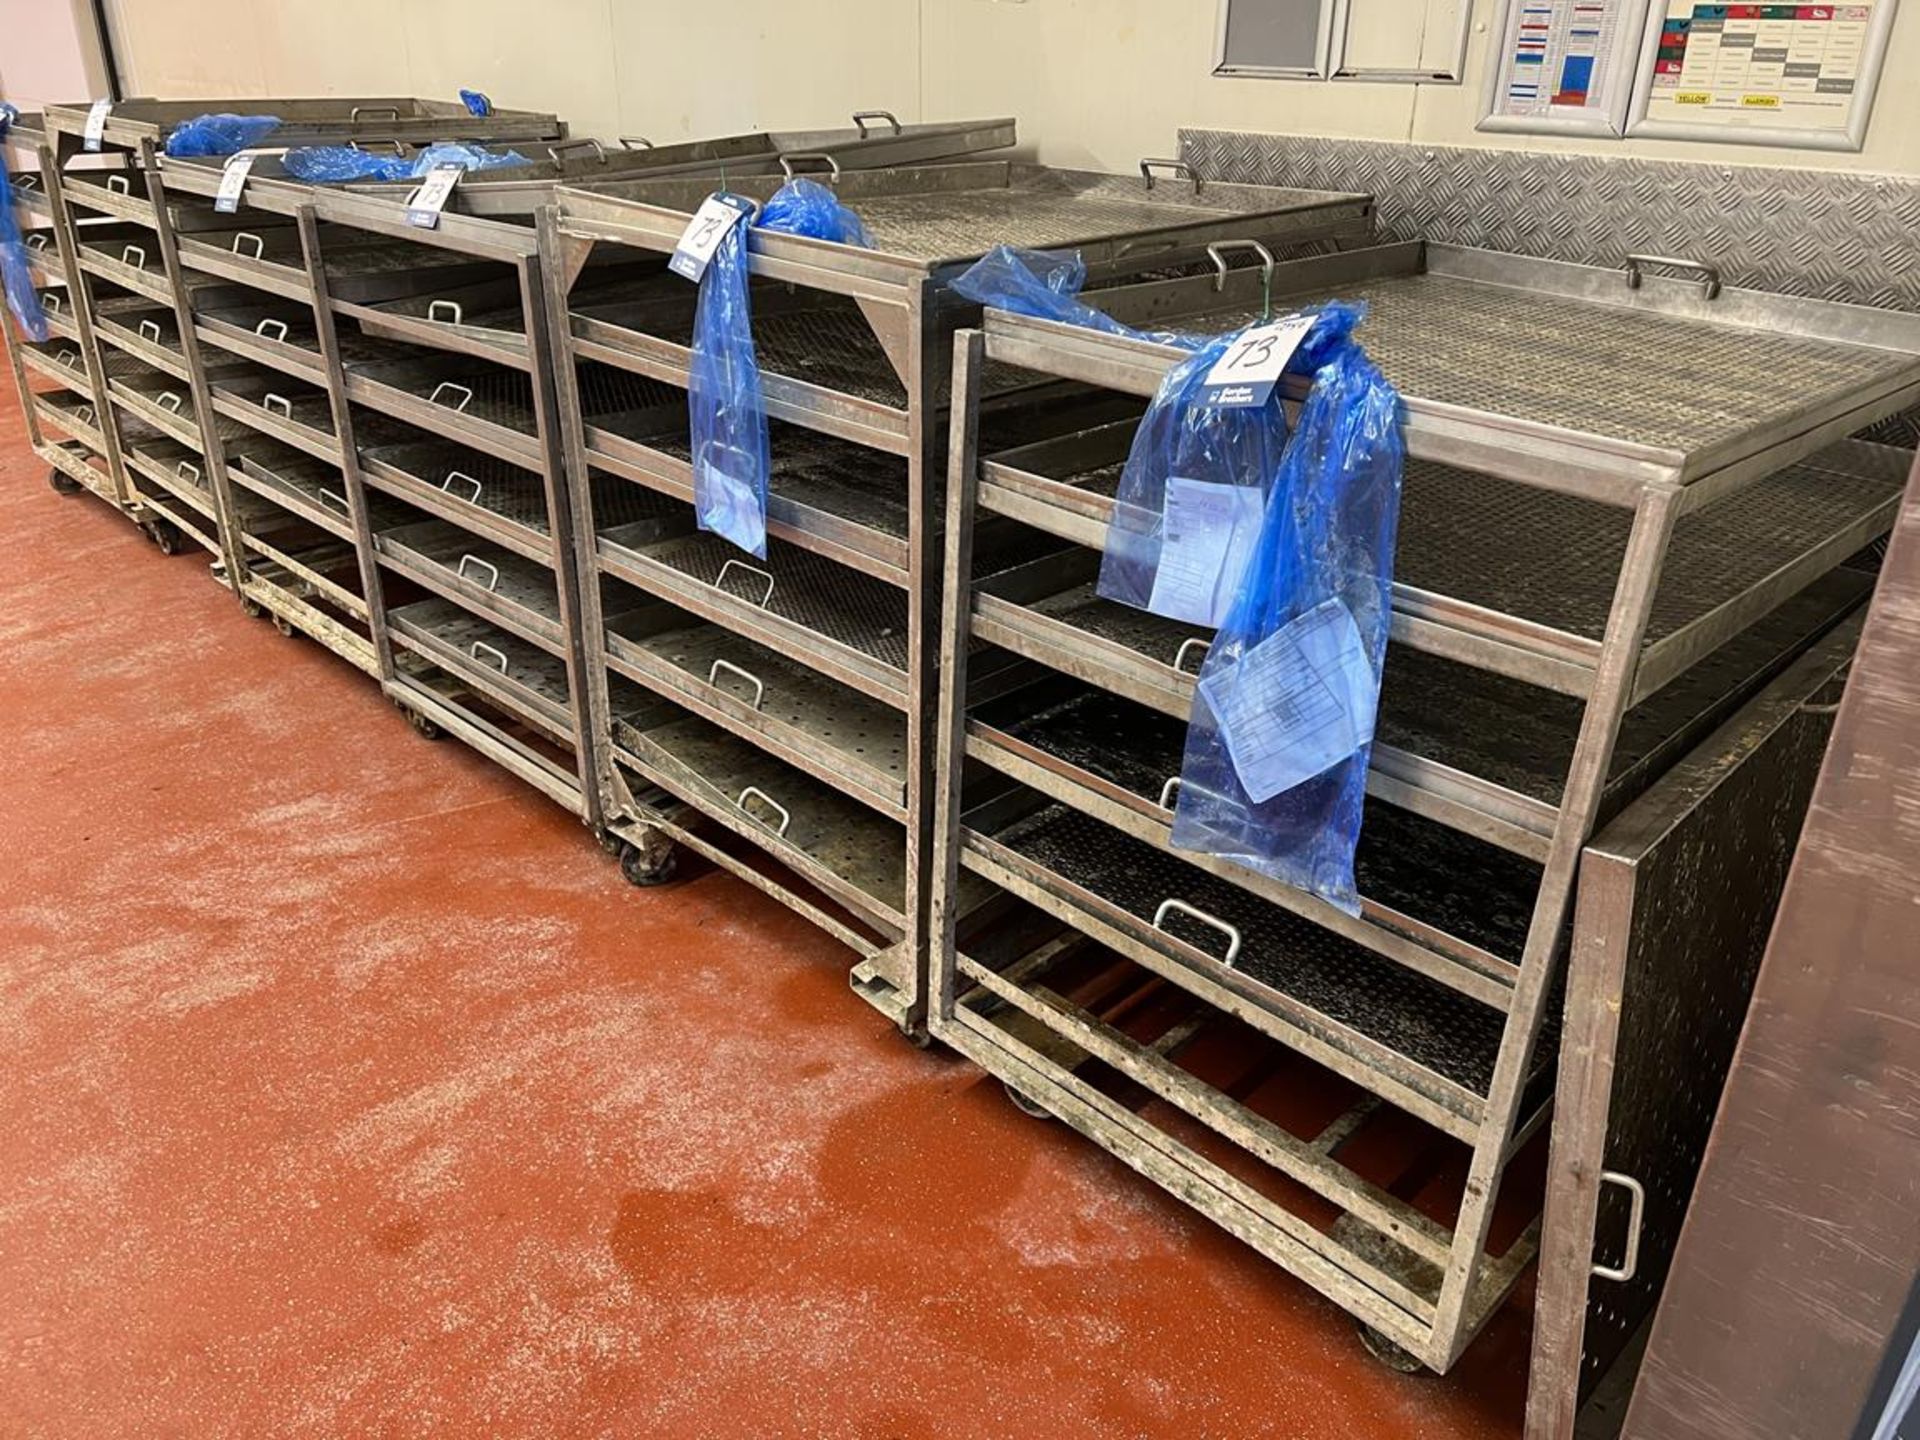 6x (no.) six/seven tier stainless steel product racks on wheels, size of removable trays 1030mm ( - Image 3 of 4